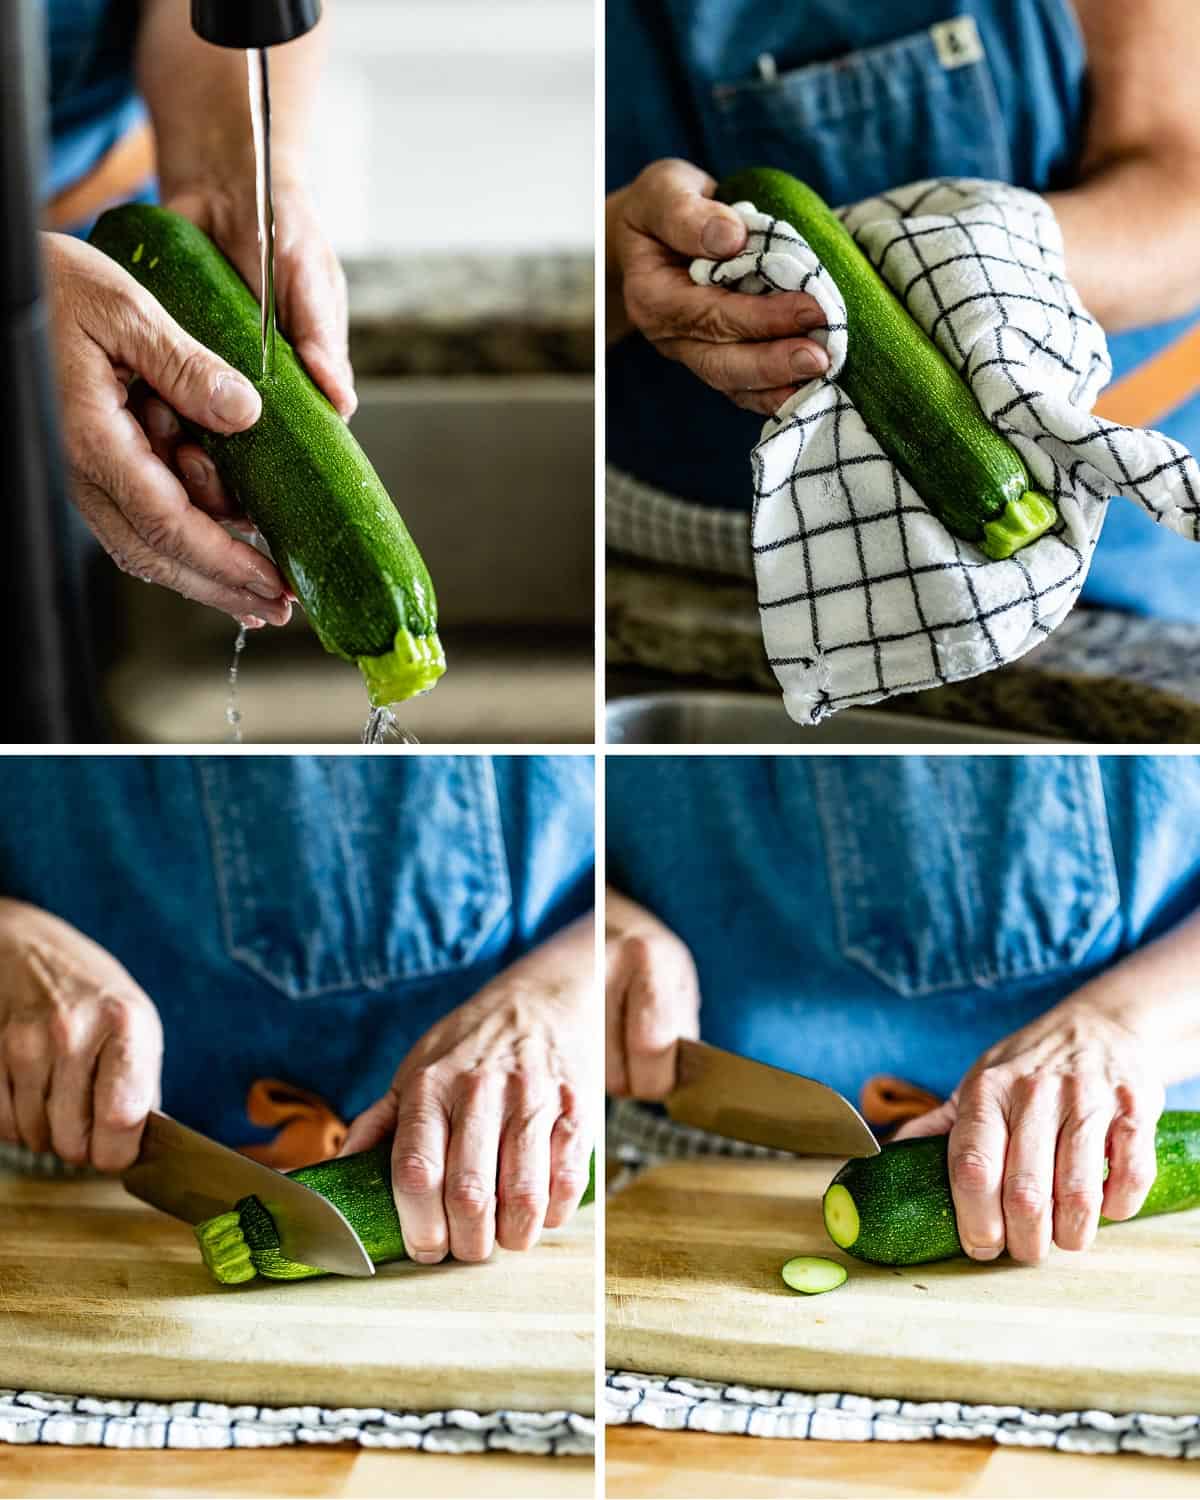 A person showing how to trim zucchini in a collage of images.